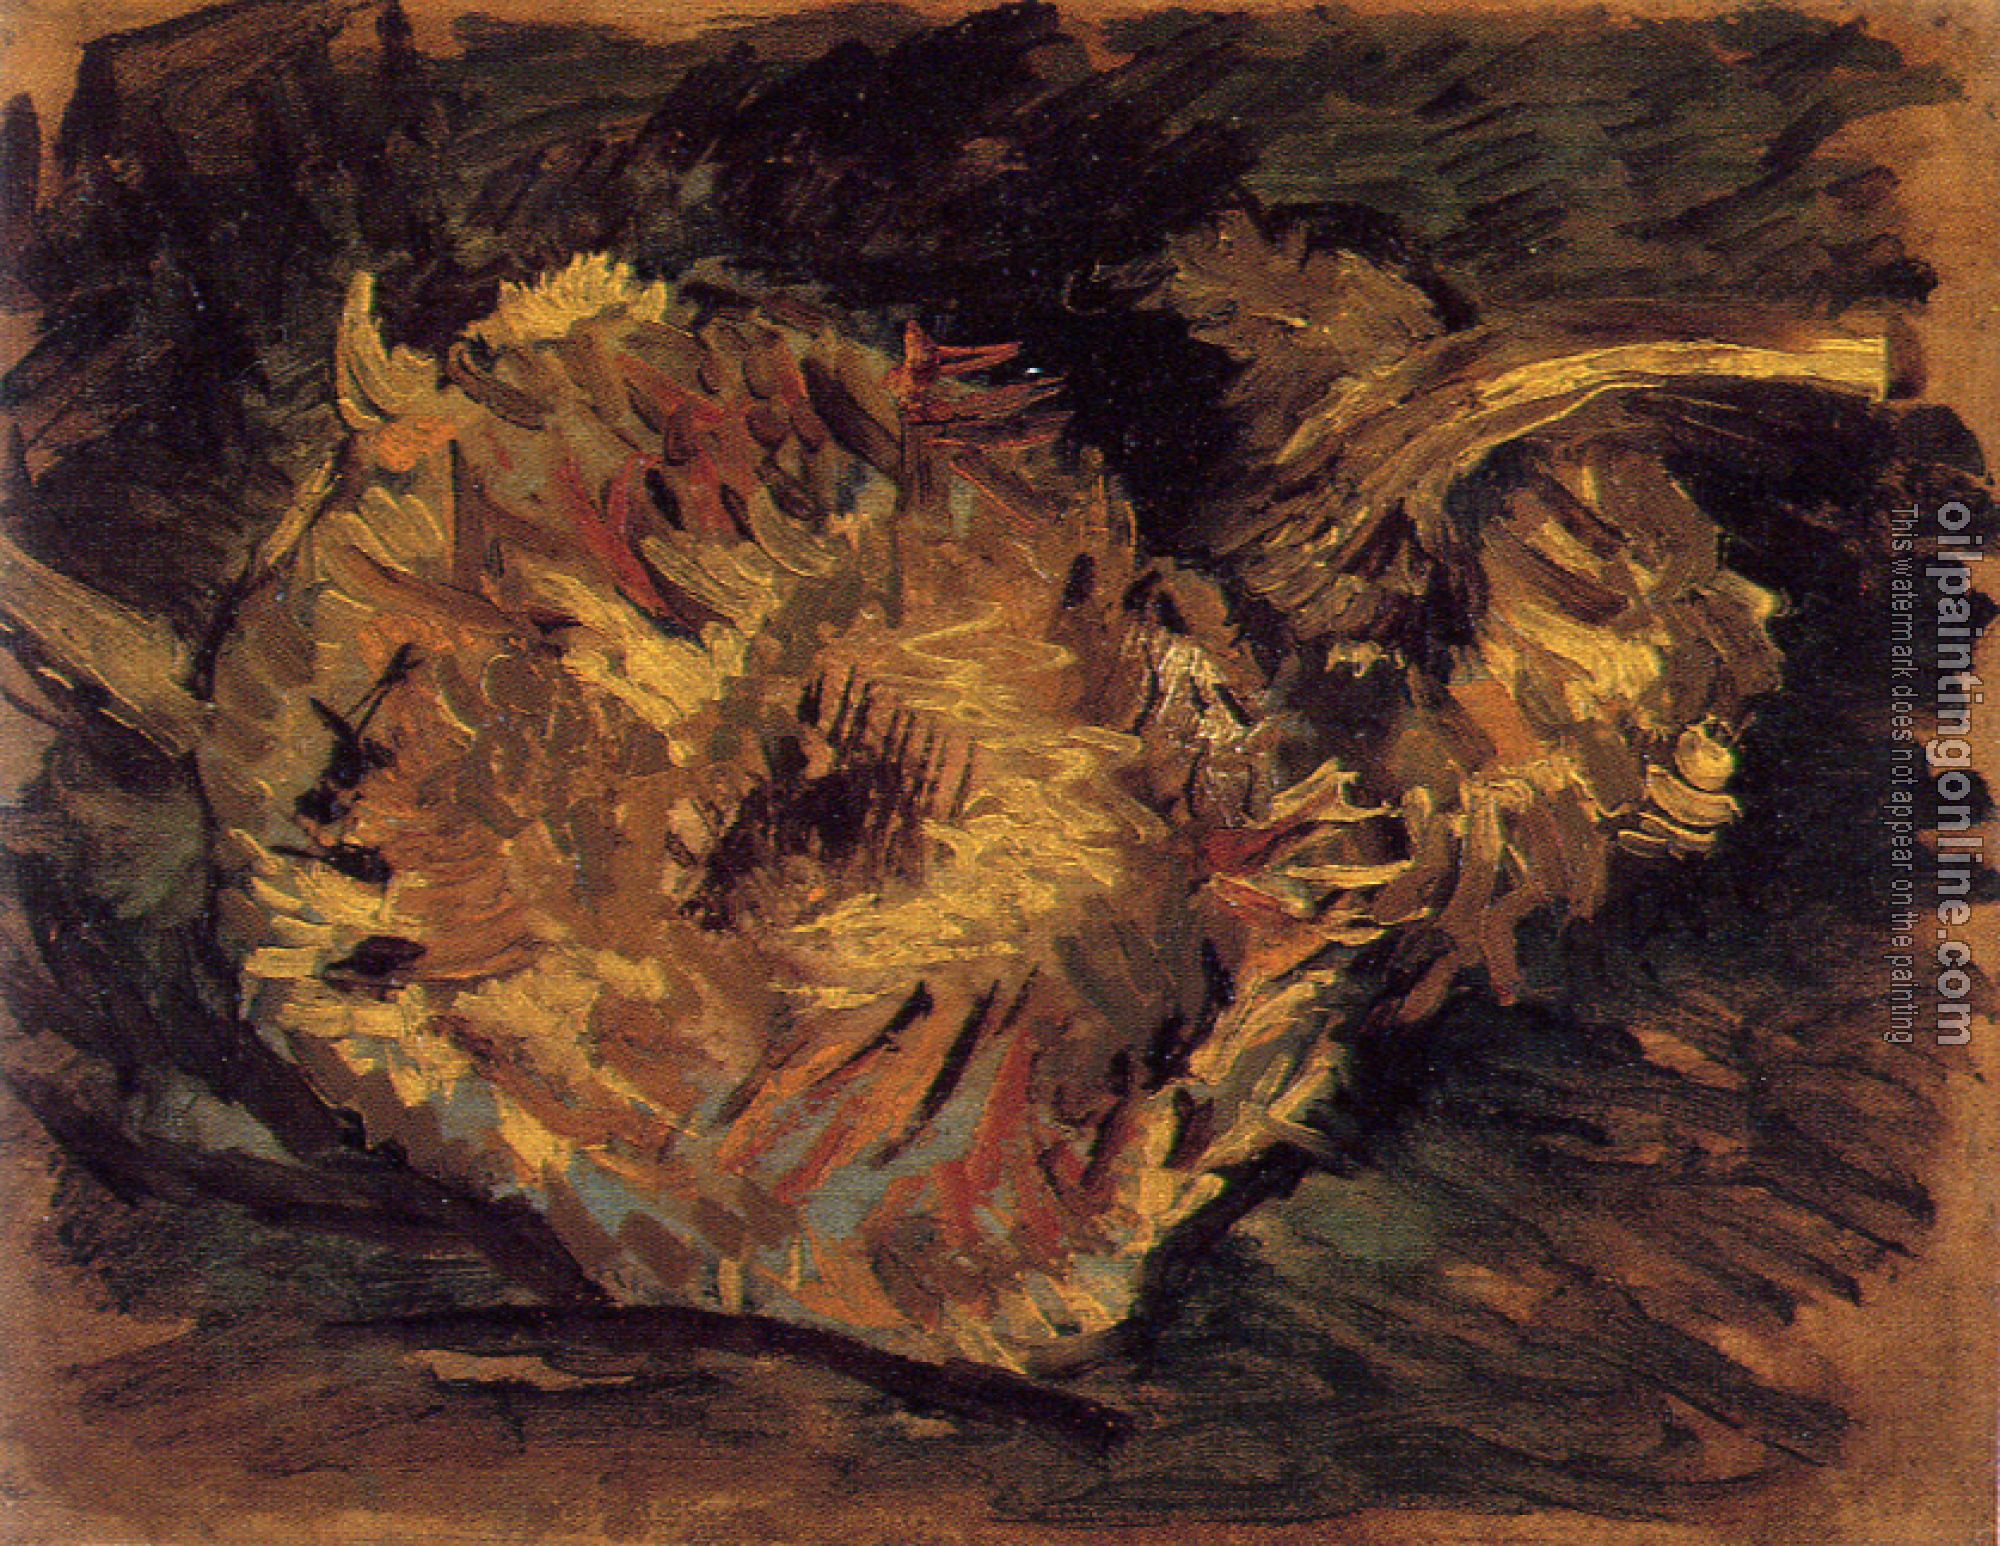 Gogh, Vincent van - Two Cut Sunflowers,One Upside Down